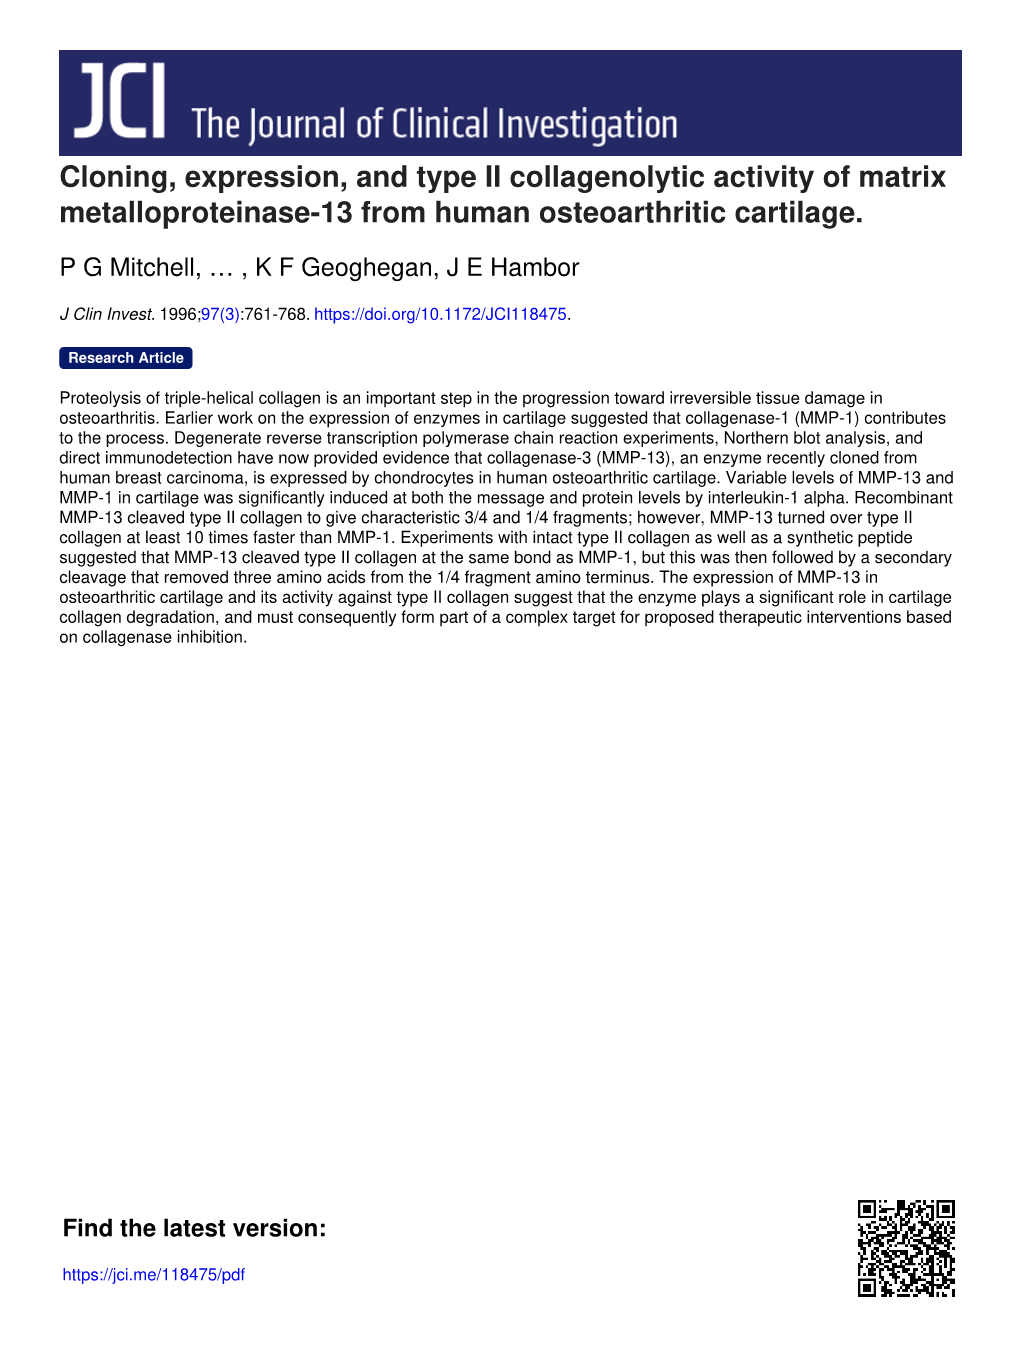 Cloning, Expression, and Type II Collagenolytic Activity of Matrix Metalloproteinase-13 from Human Osteoarthritic Cartilage